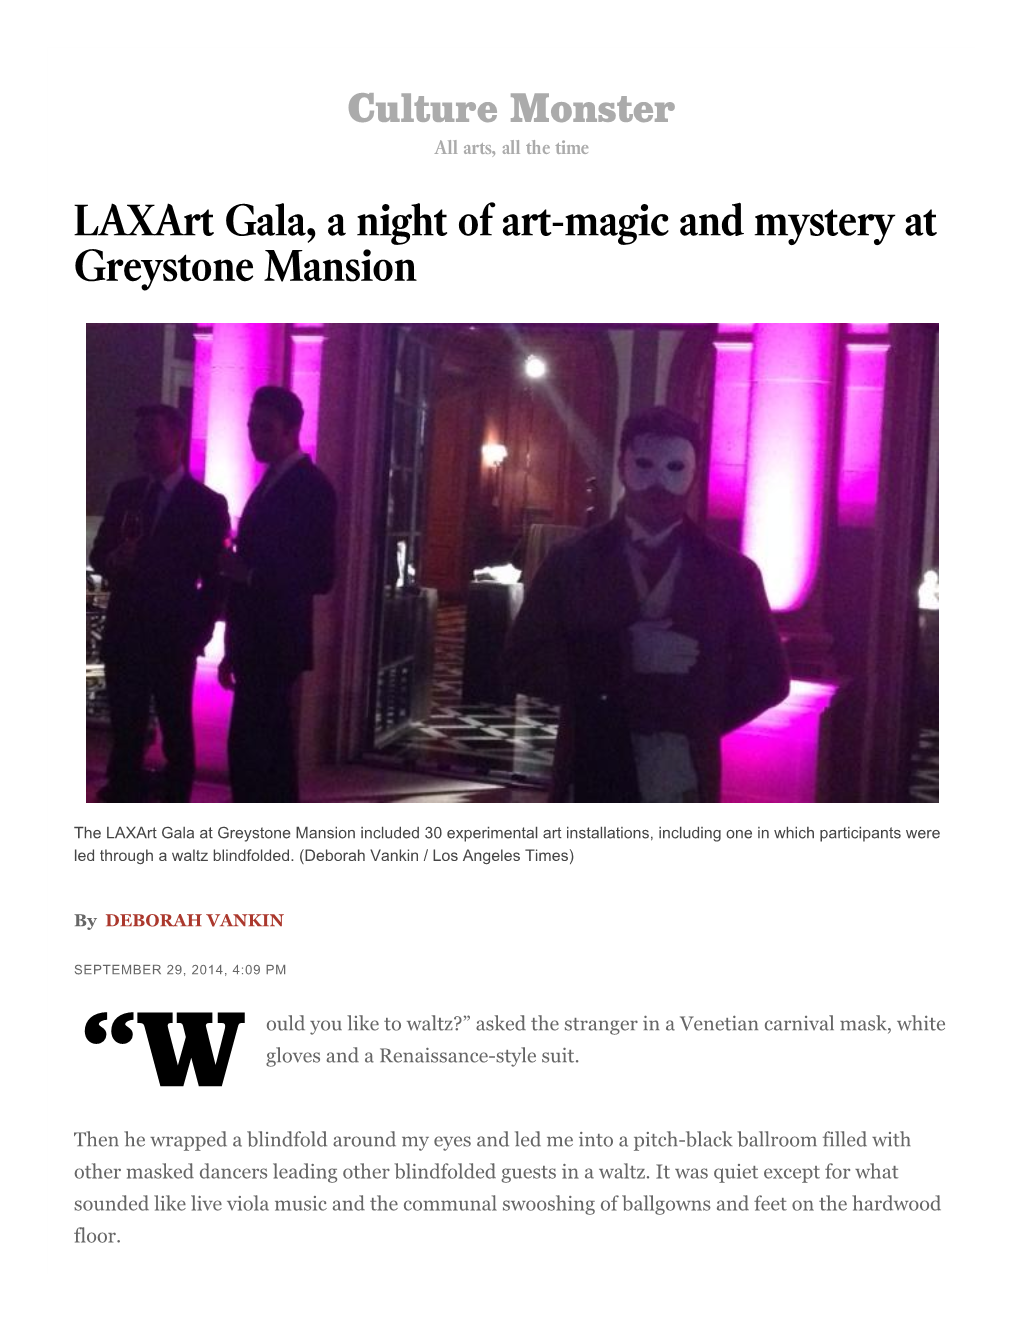 Laxart Gala, a Night of Art-Magic and Mystery at Greystone Mansion